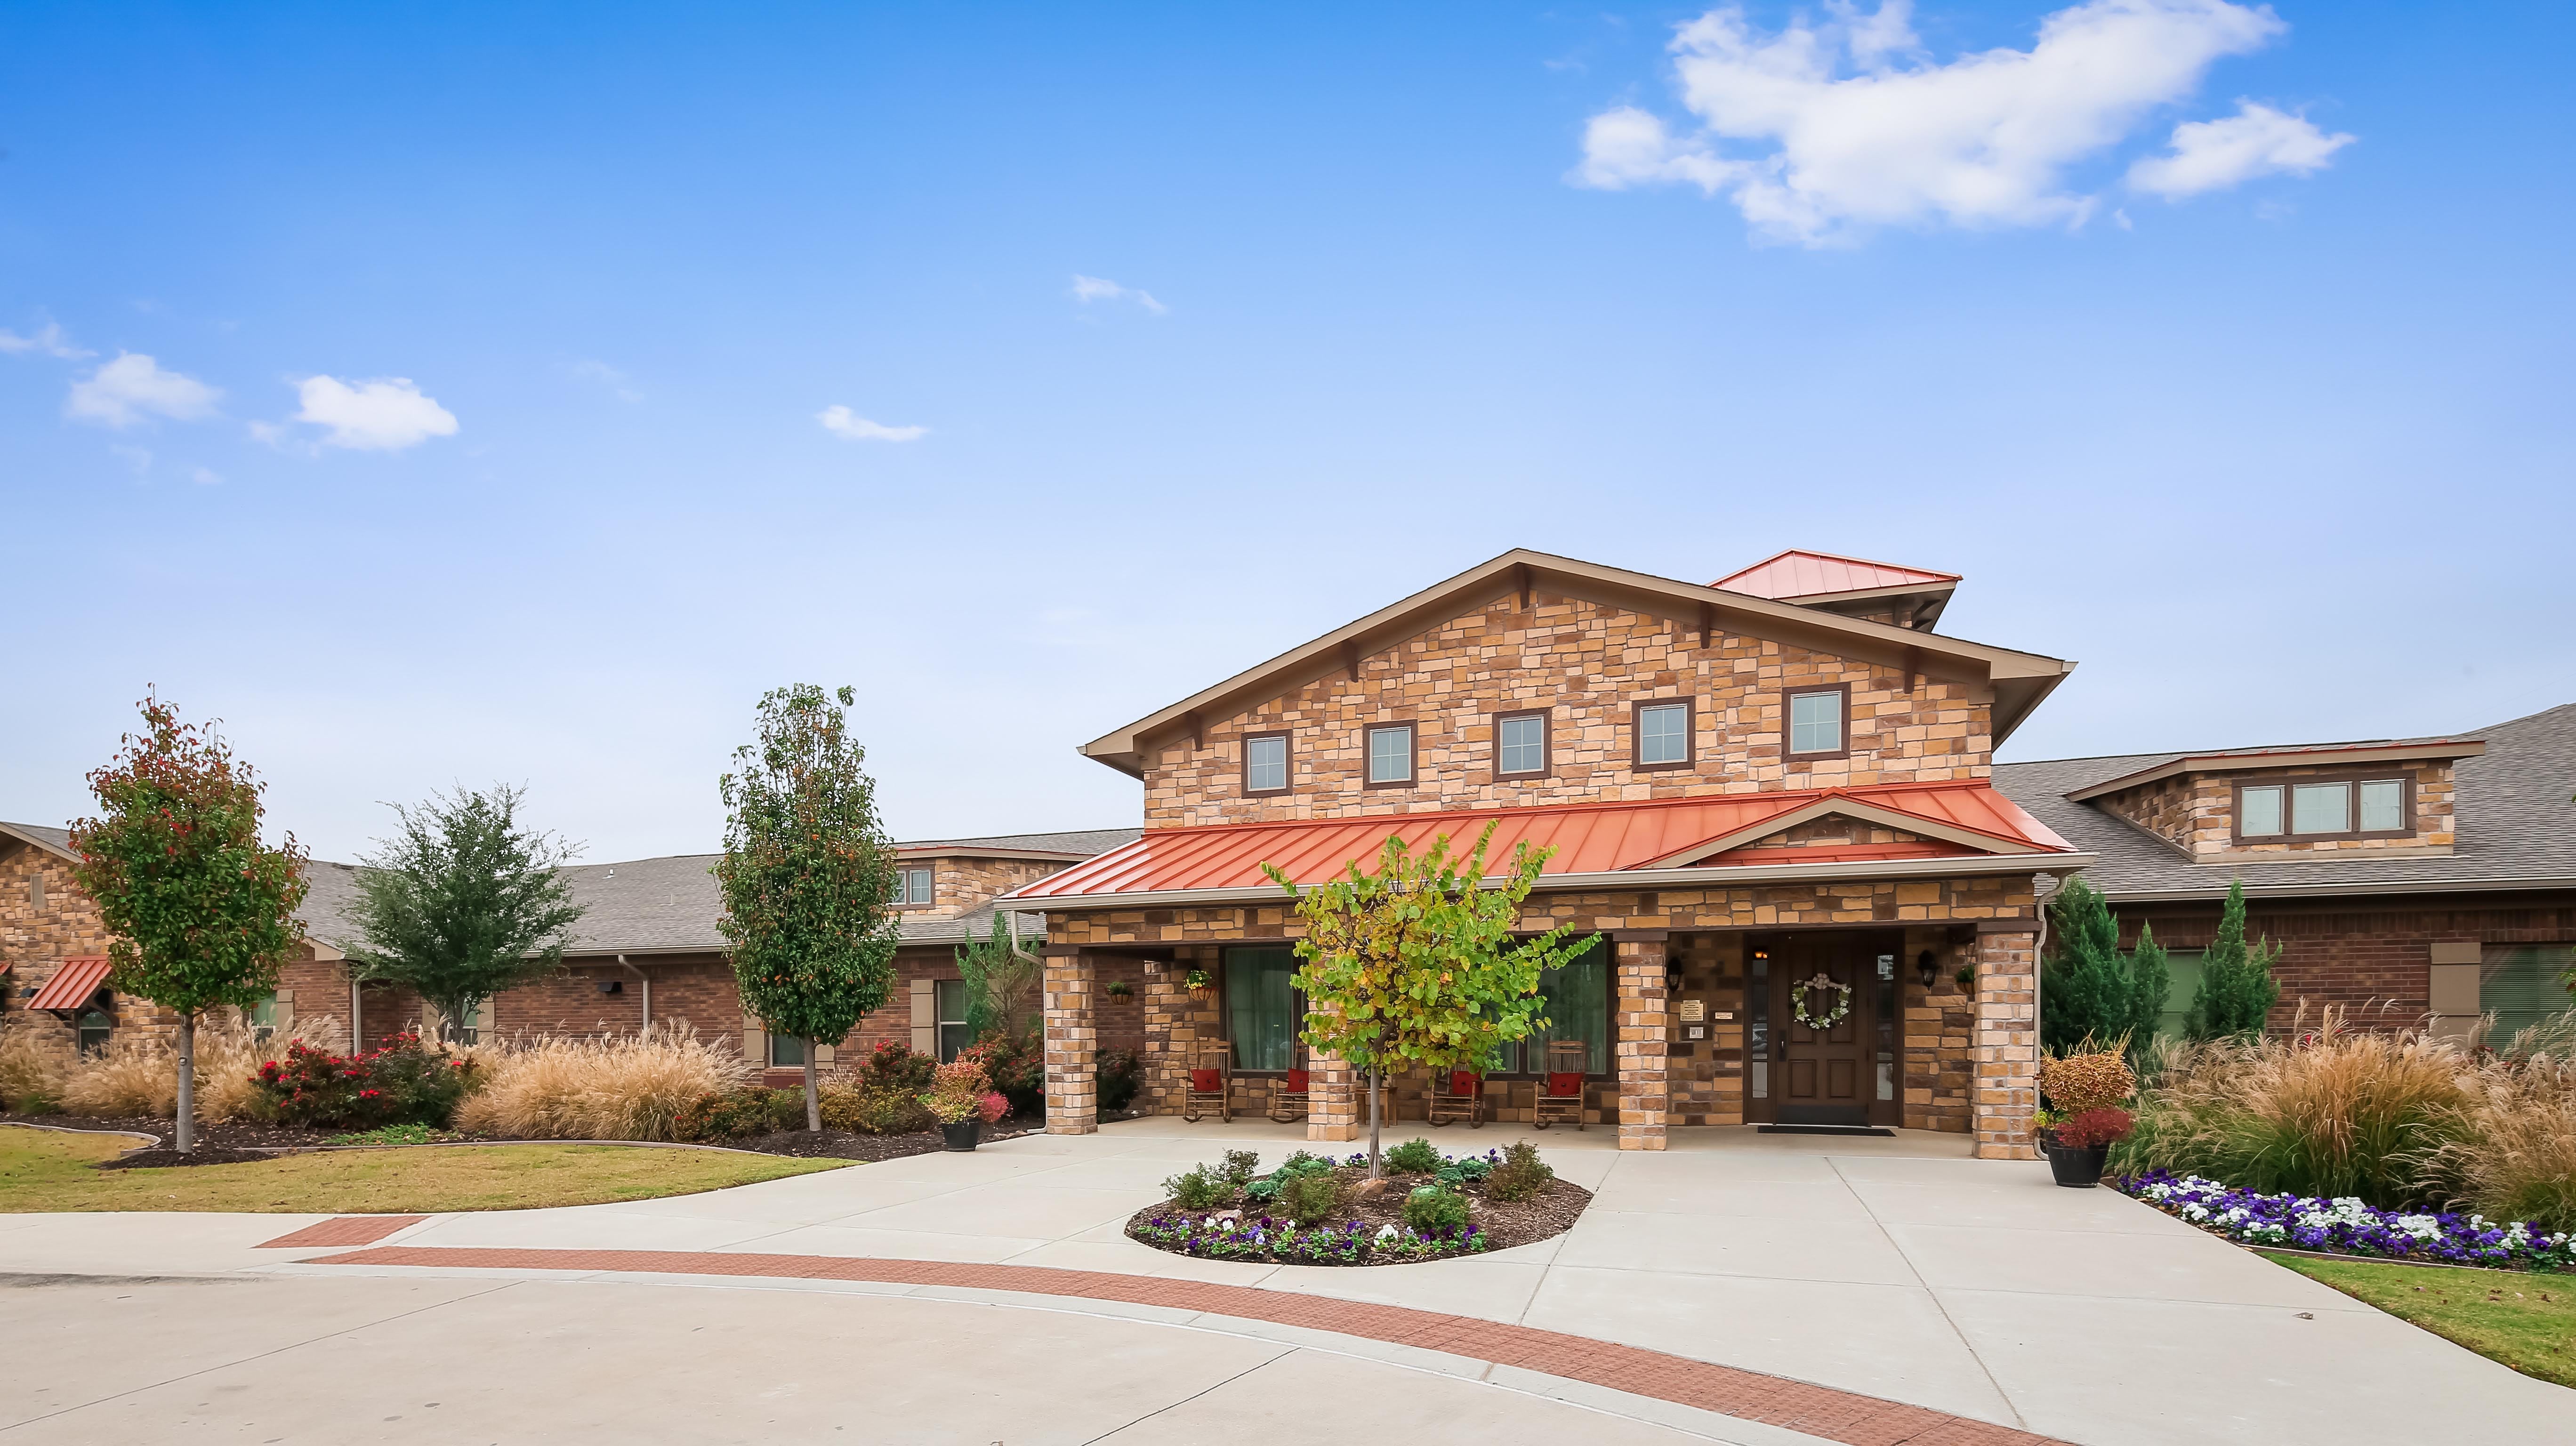 Meadowood Assisted Living & Memory Care community exterior